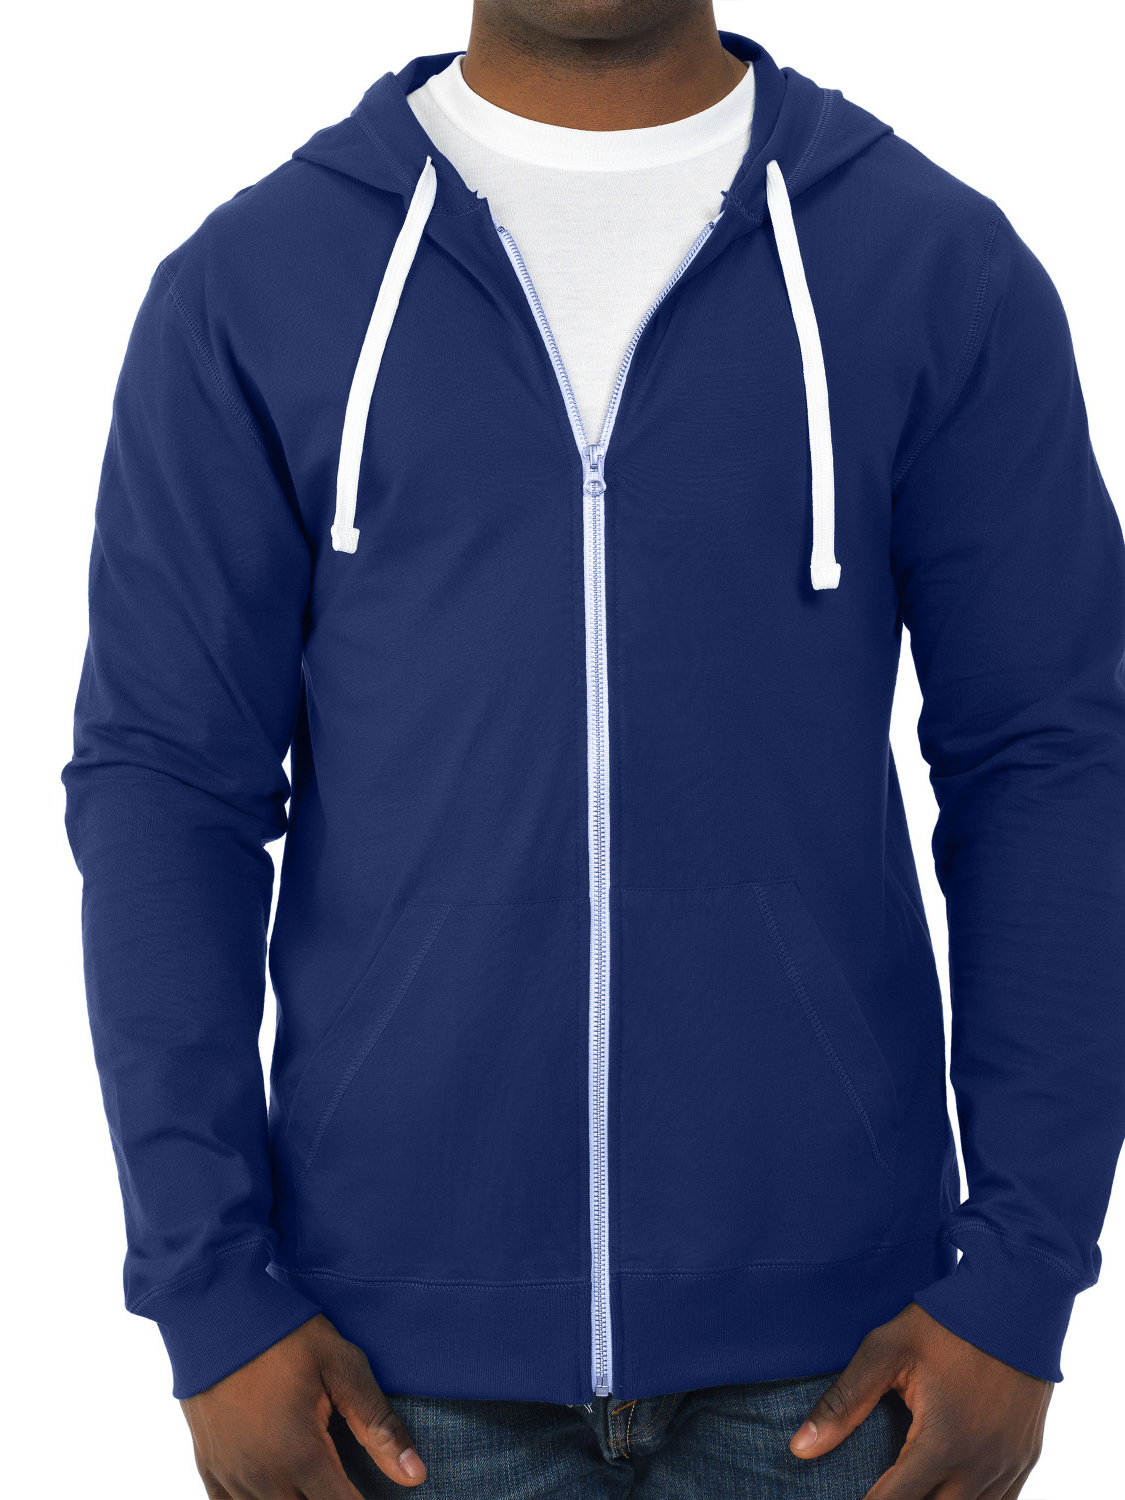 Fruit of the loom Men's and Big Men's Soft Jersey Full Zip Hooded Jacket - image 1 of 6